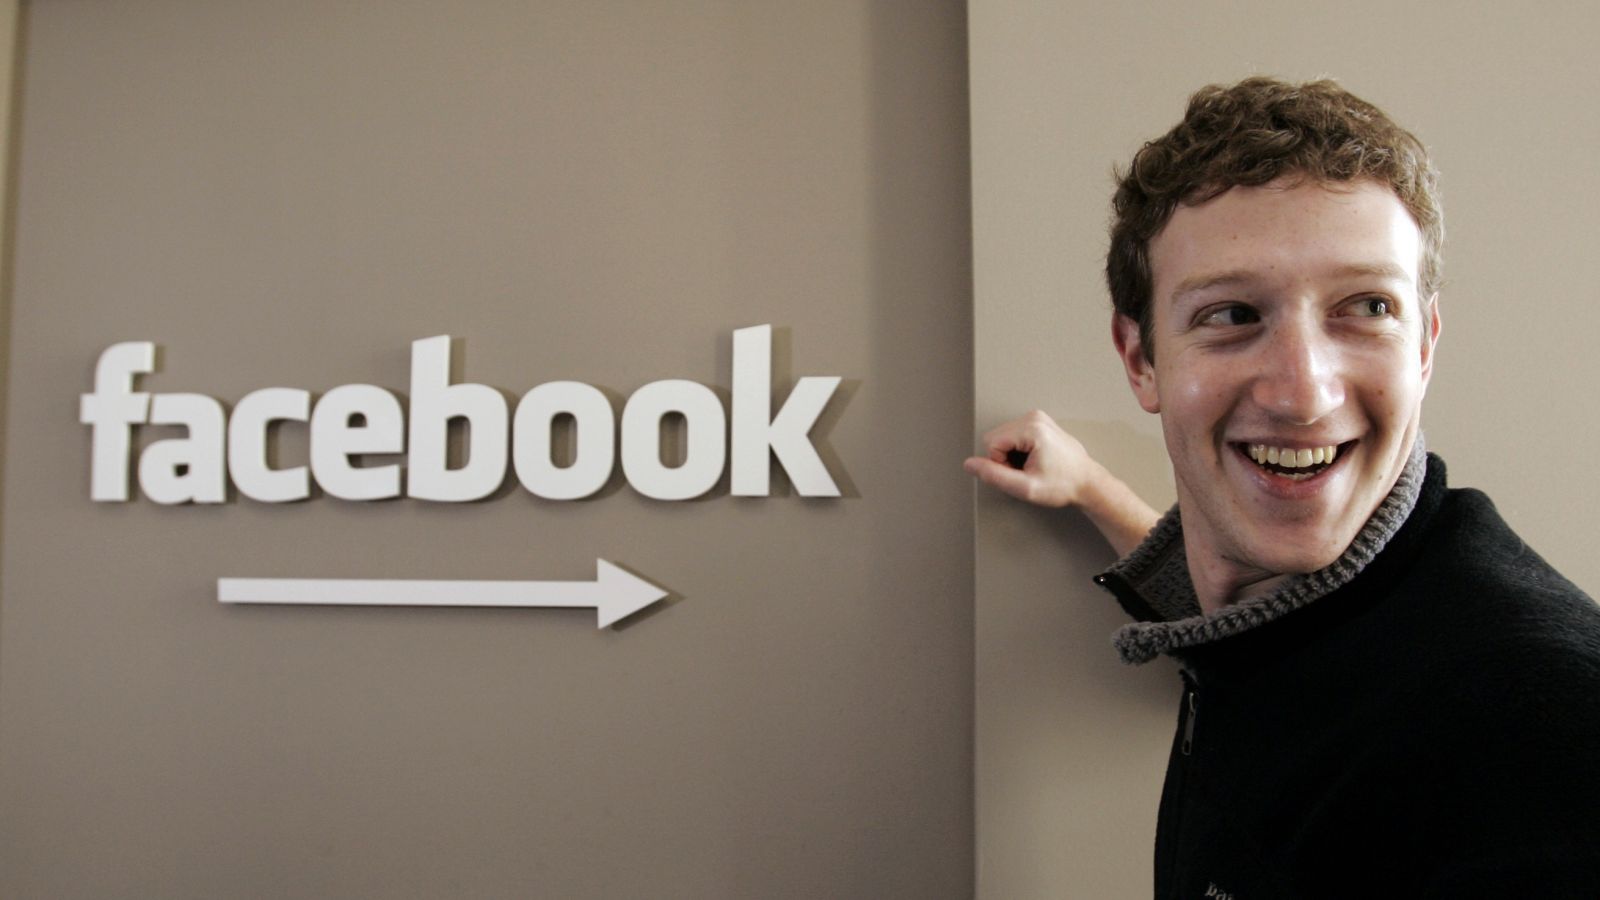 Is Facebook founder a dictator?